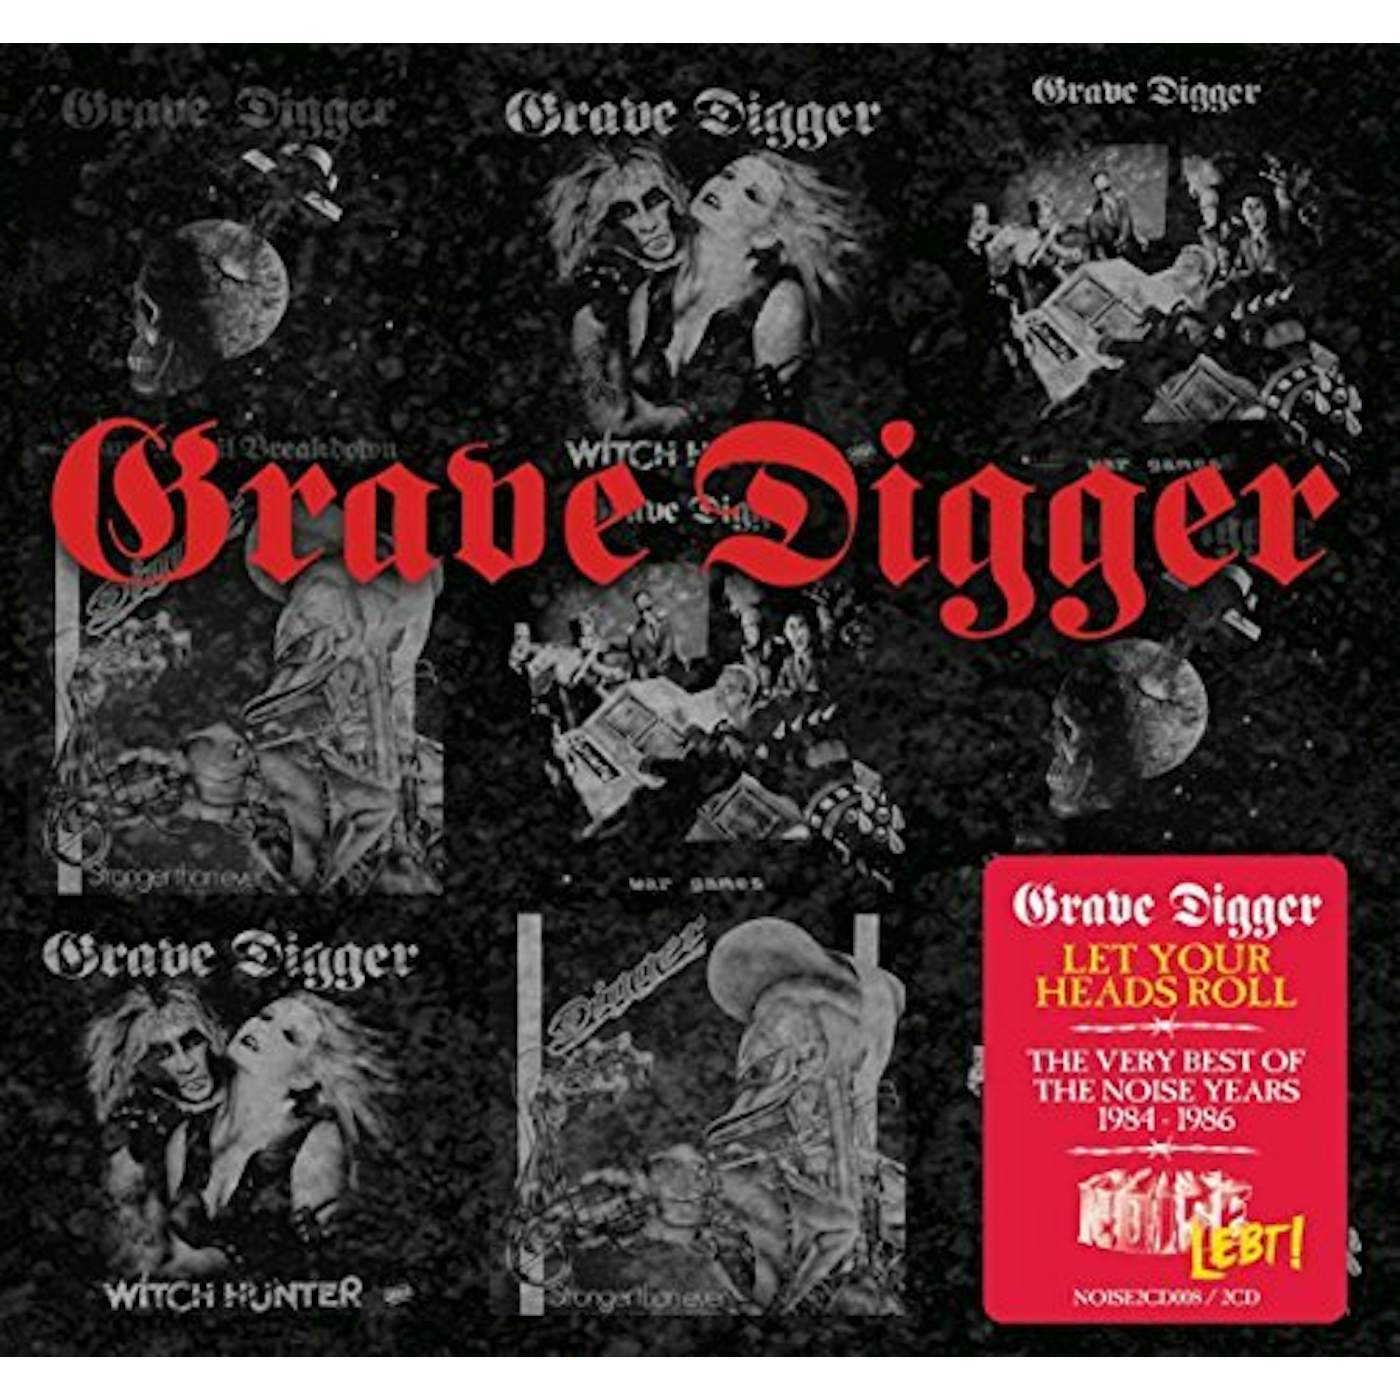 Grave Digger LET YOUR HEADS ROLL: VERY BEST OF THE NOISE YEARS CD